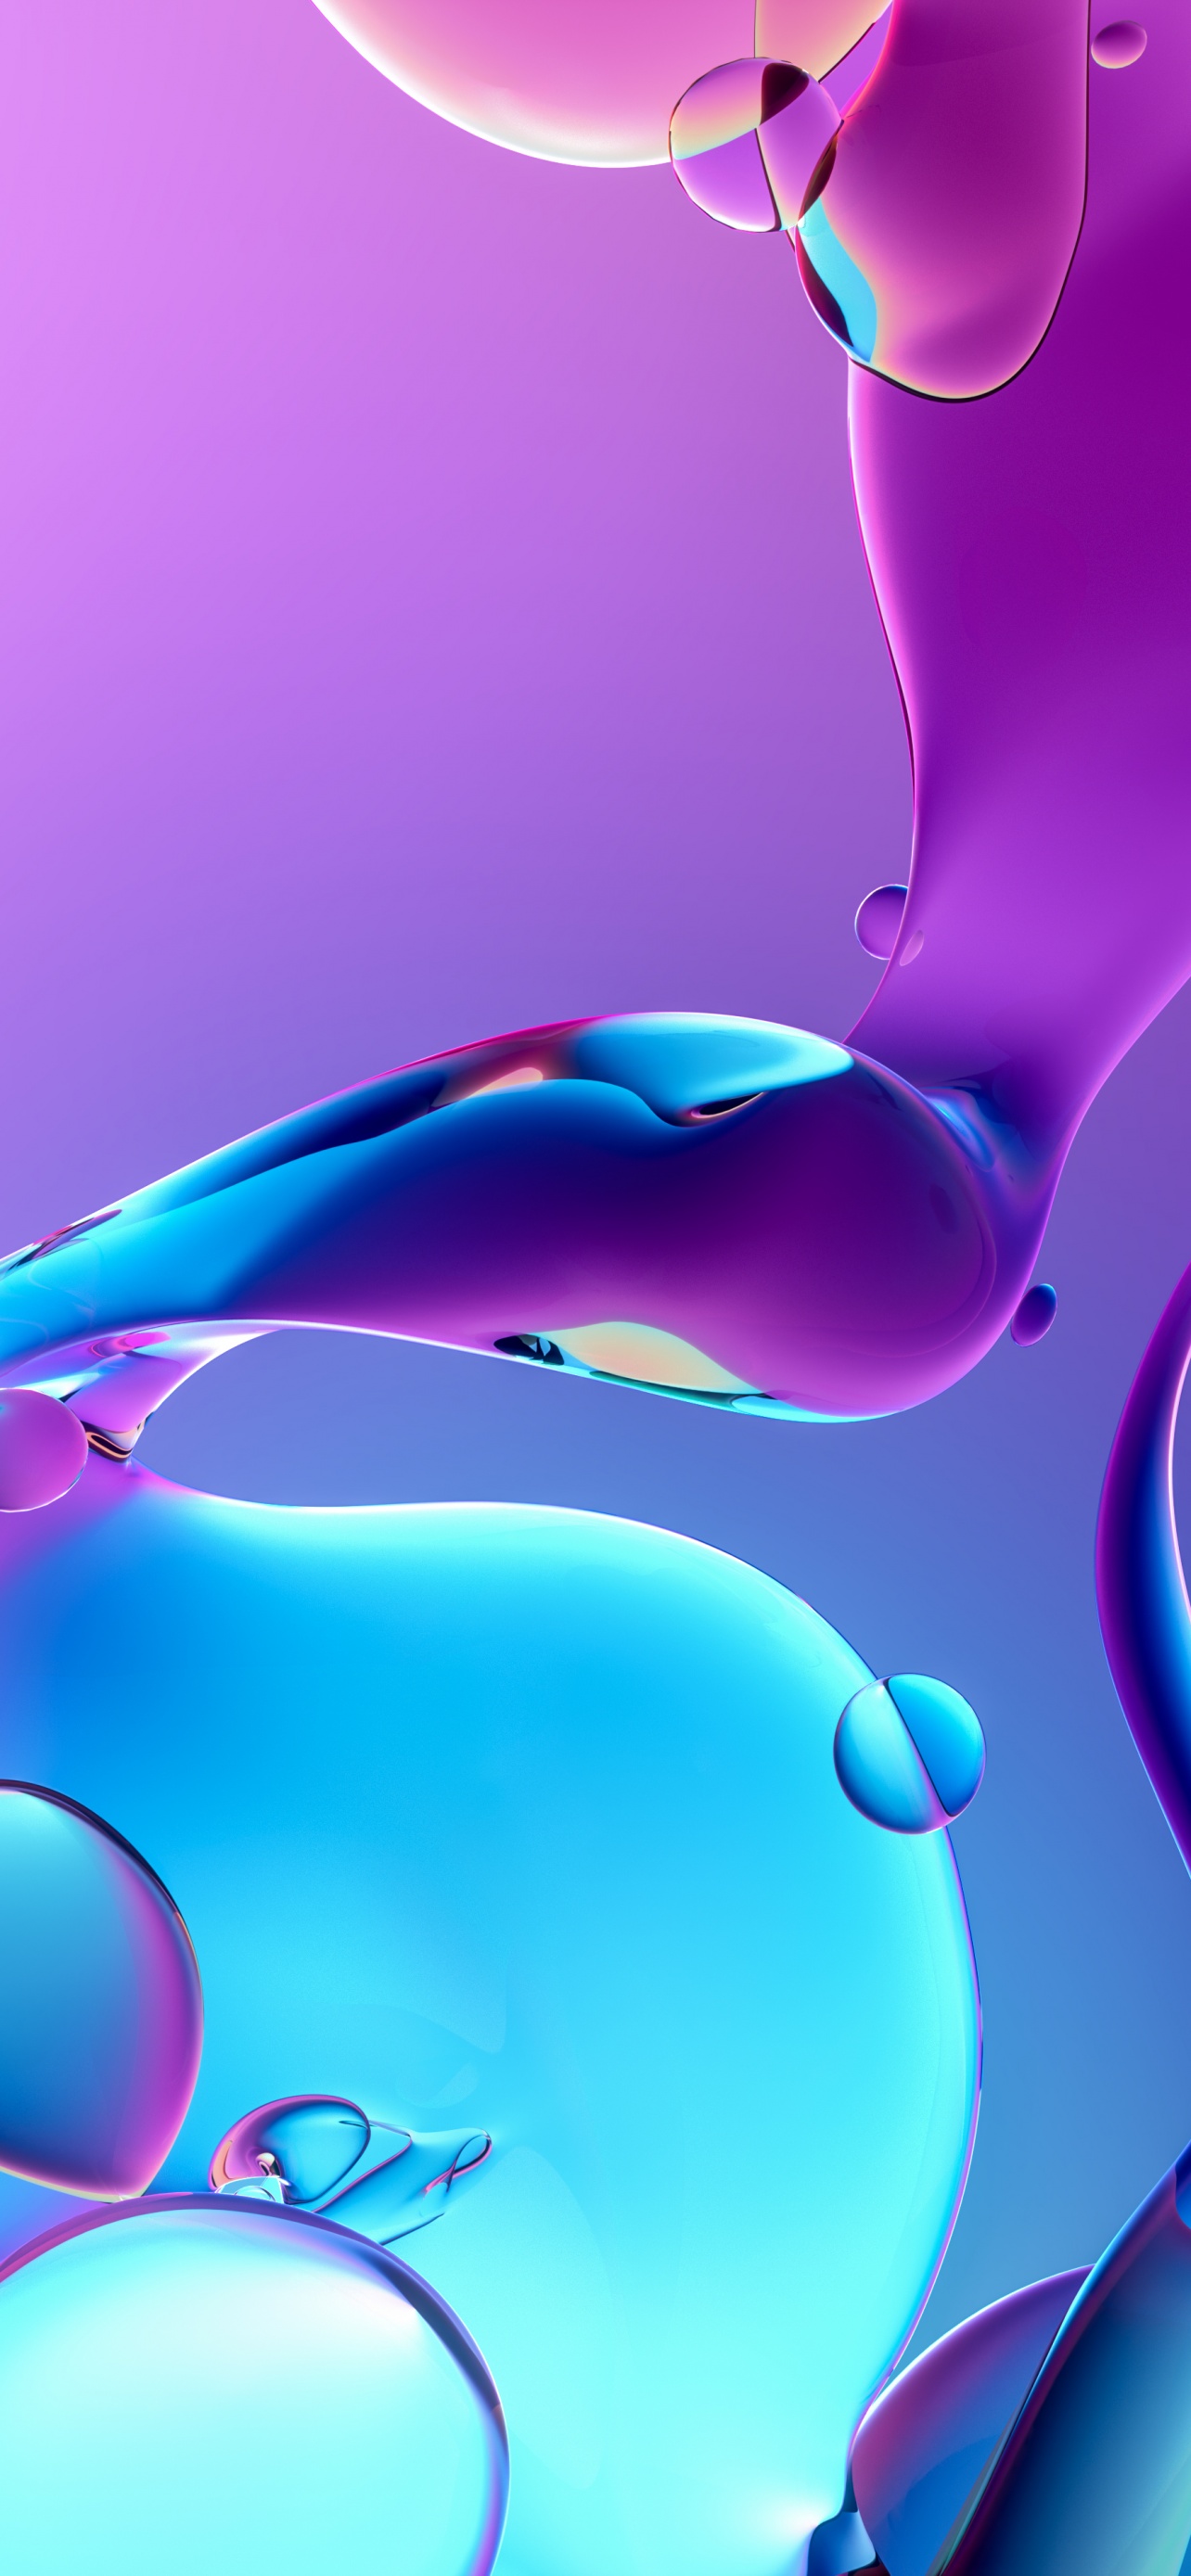 Fluidic Wallpaper 4K, Glossy, Abstract, #7641